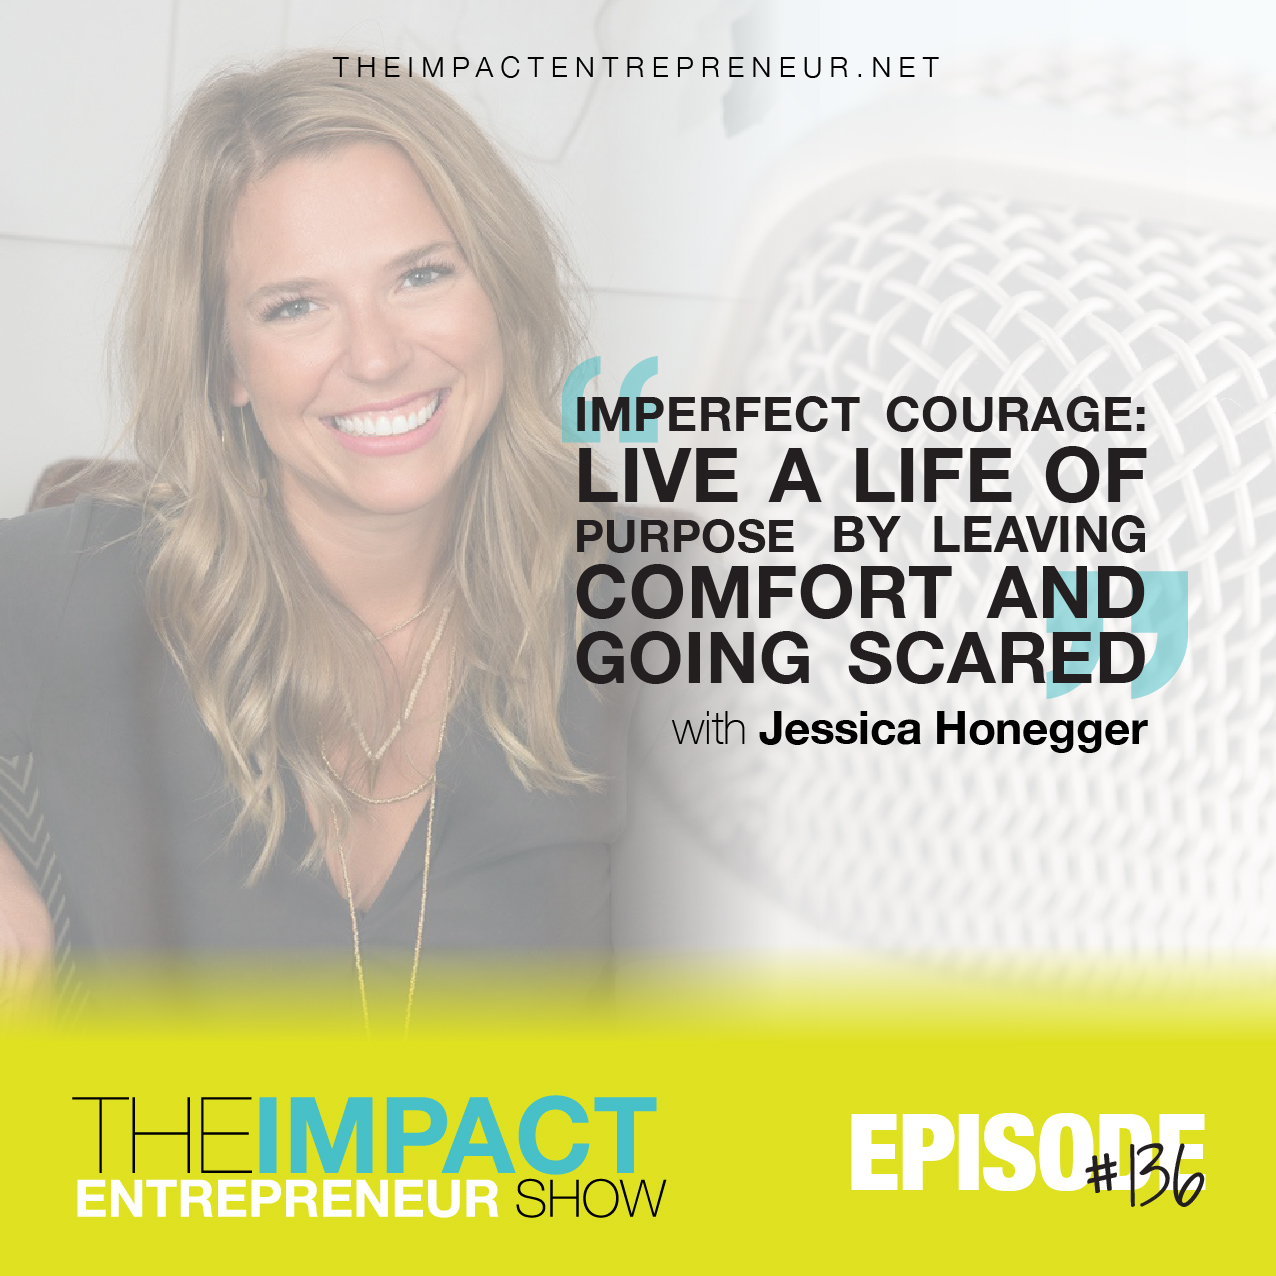 Ep. 136 - Imperfect Courage: Live a Life of Purpose by Leaving Comfort and Going Scared - with Jessica Honegger